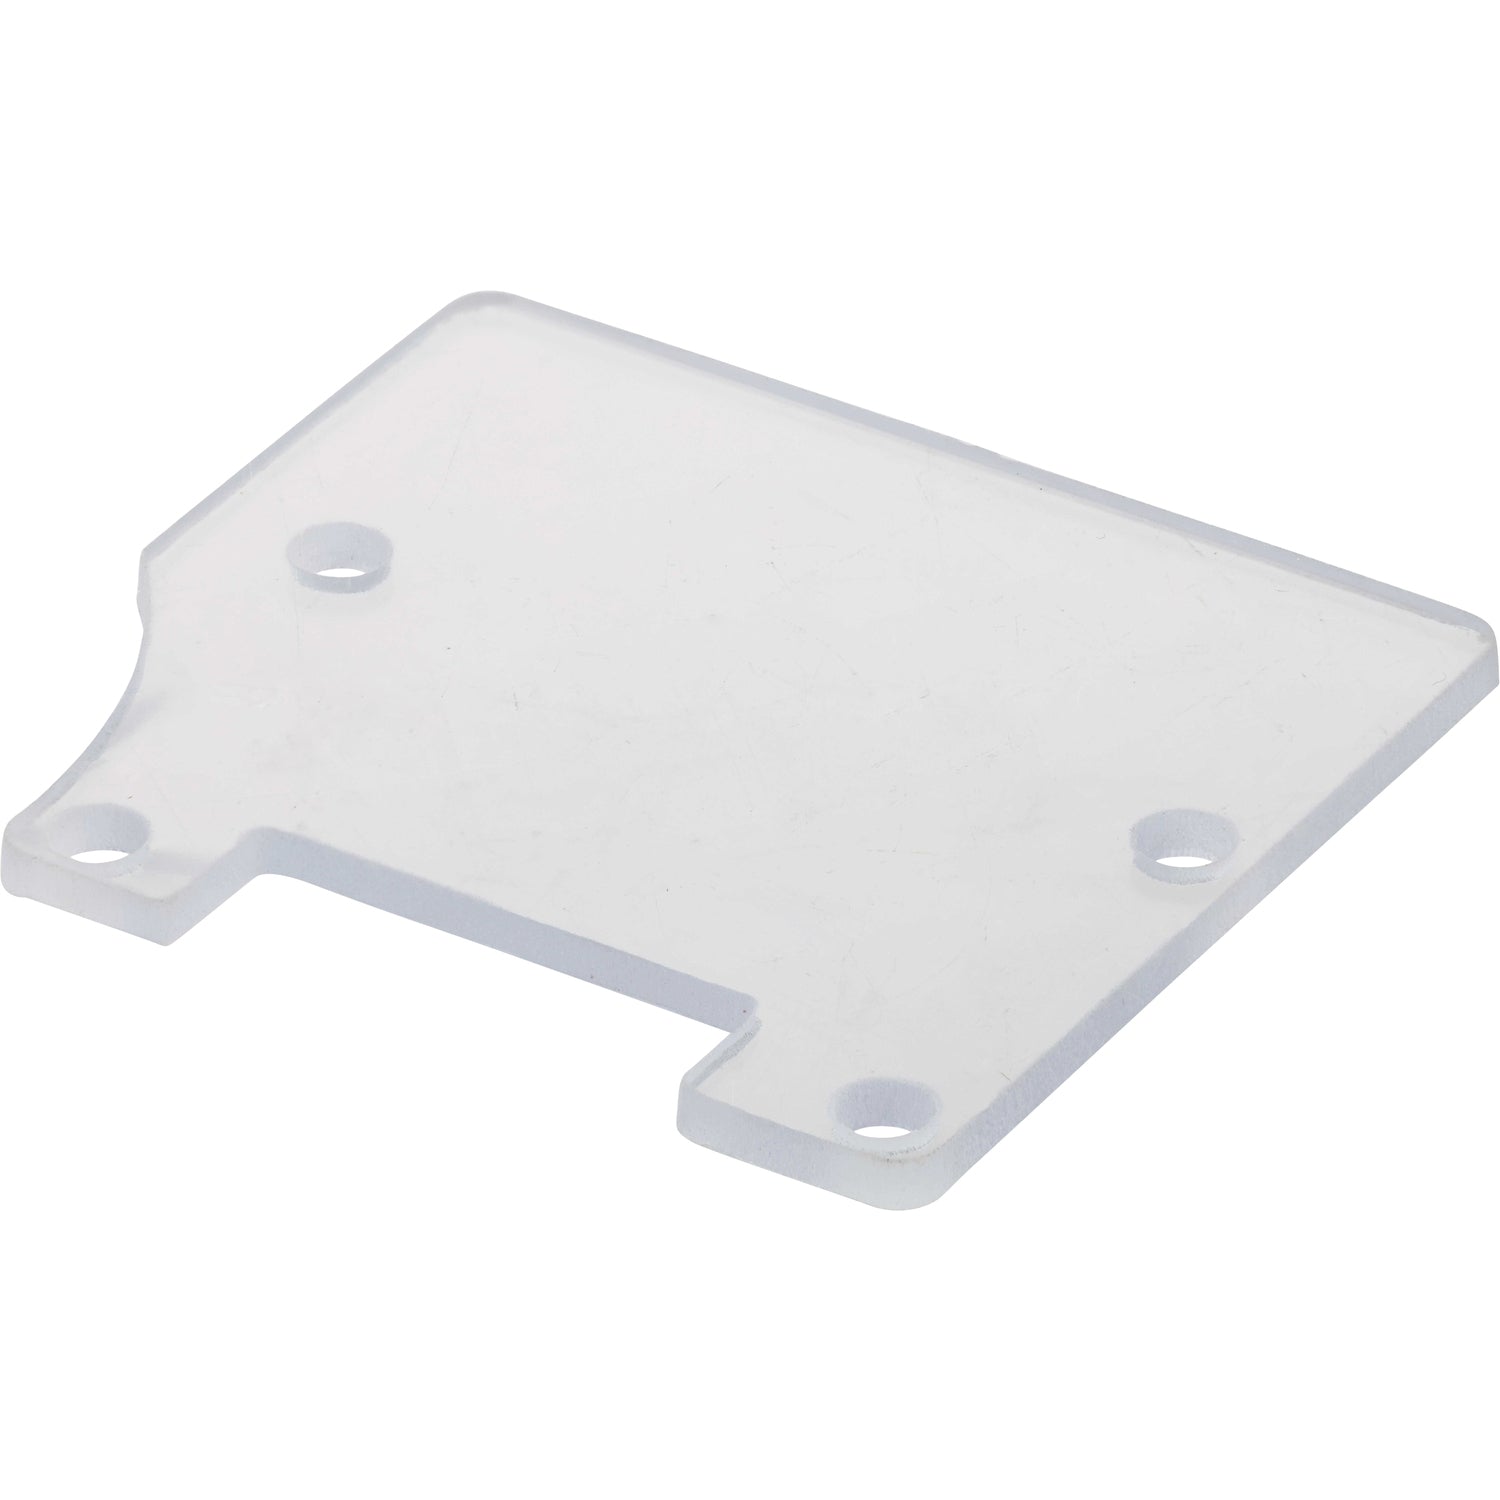 Small, rectangular, transparent polycarbonate guard with four mounting holes shown on white background. 